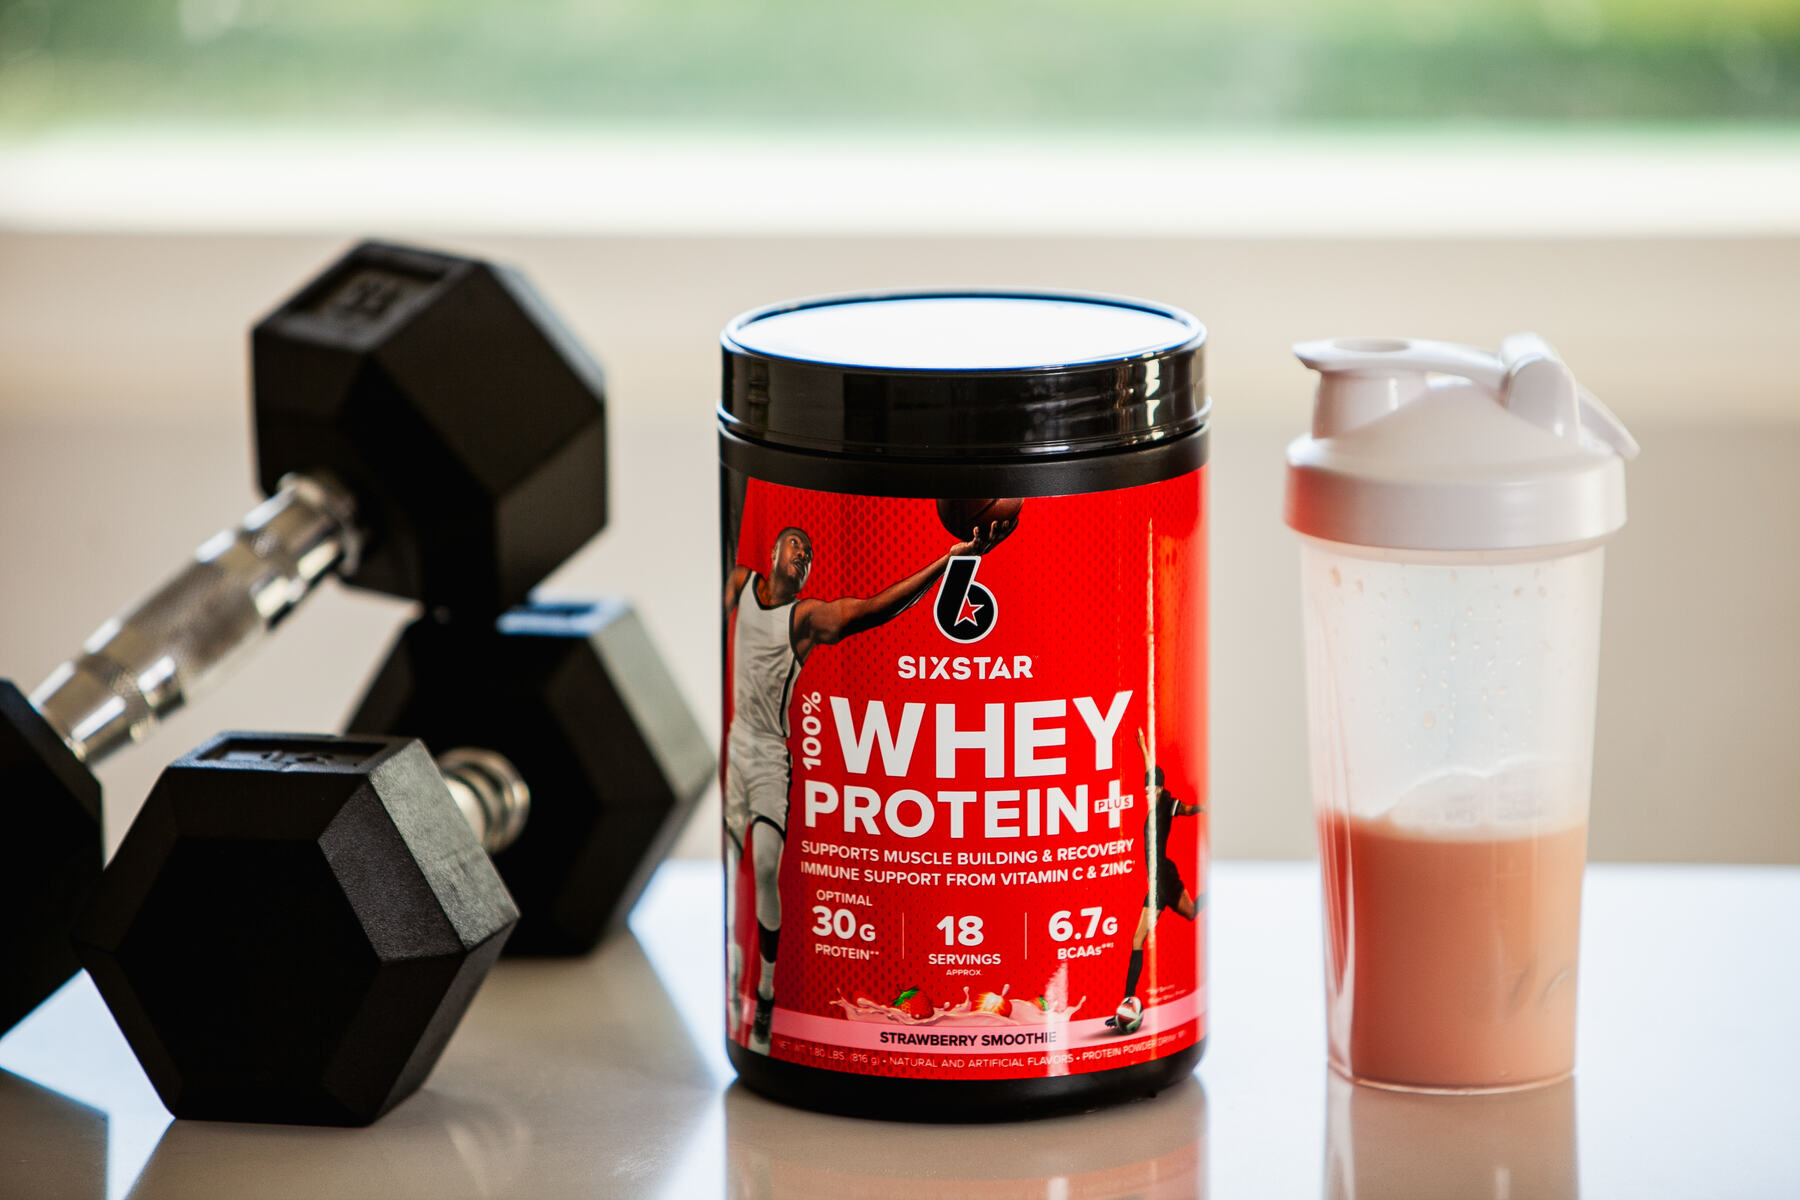 Whey protein and shaker bottle next to dumbbells